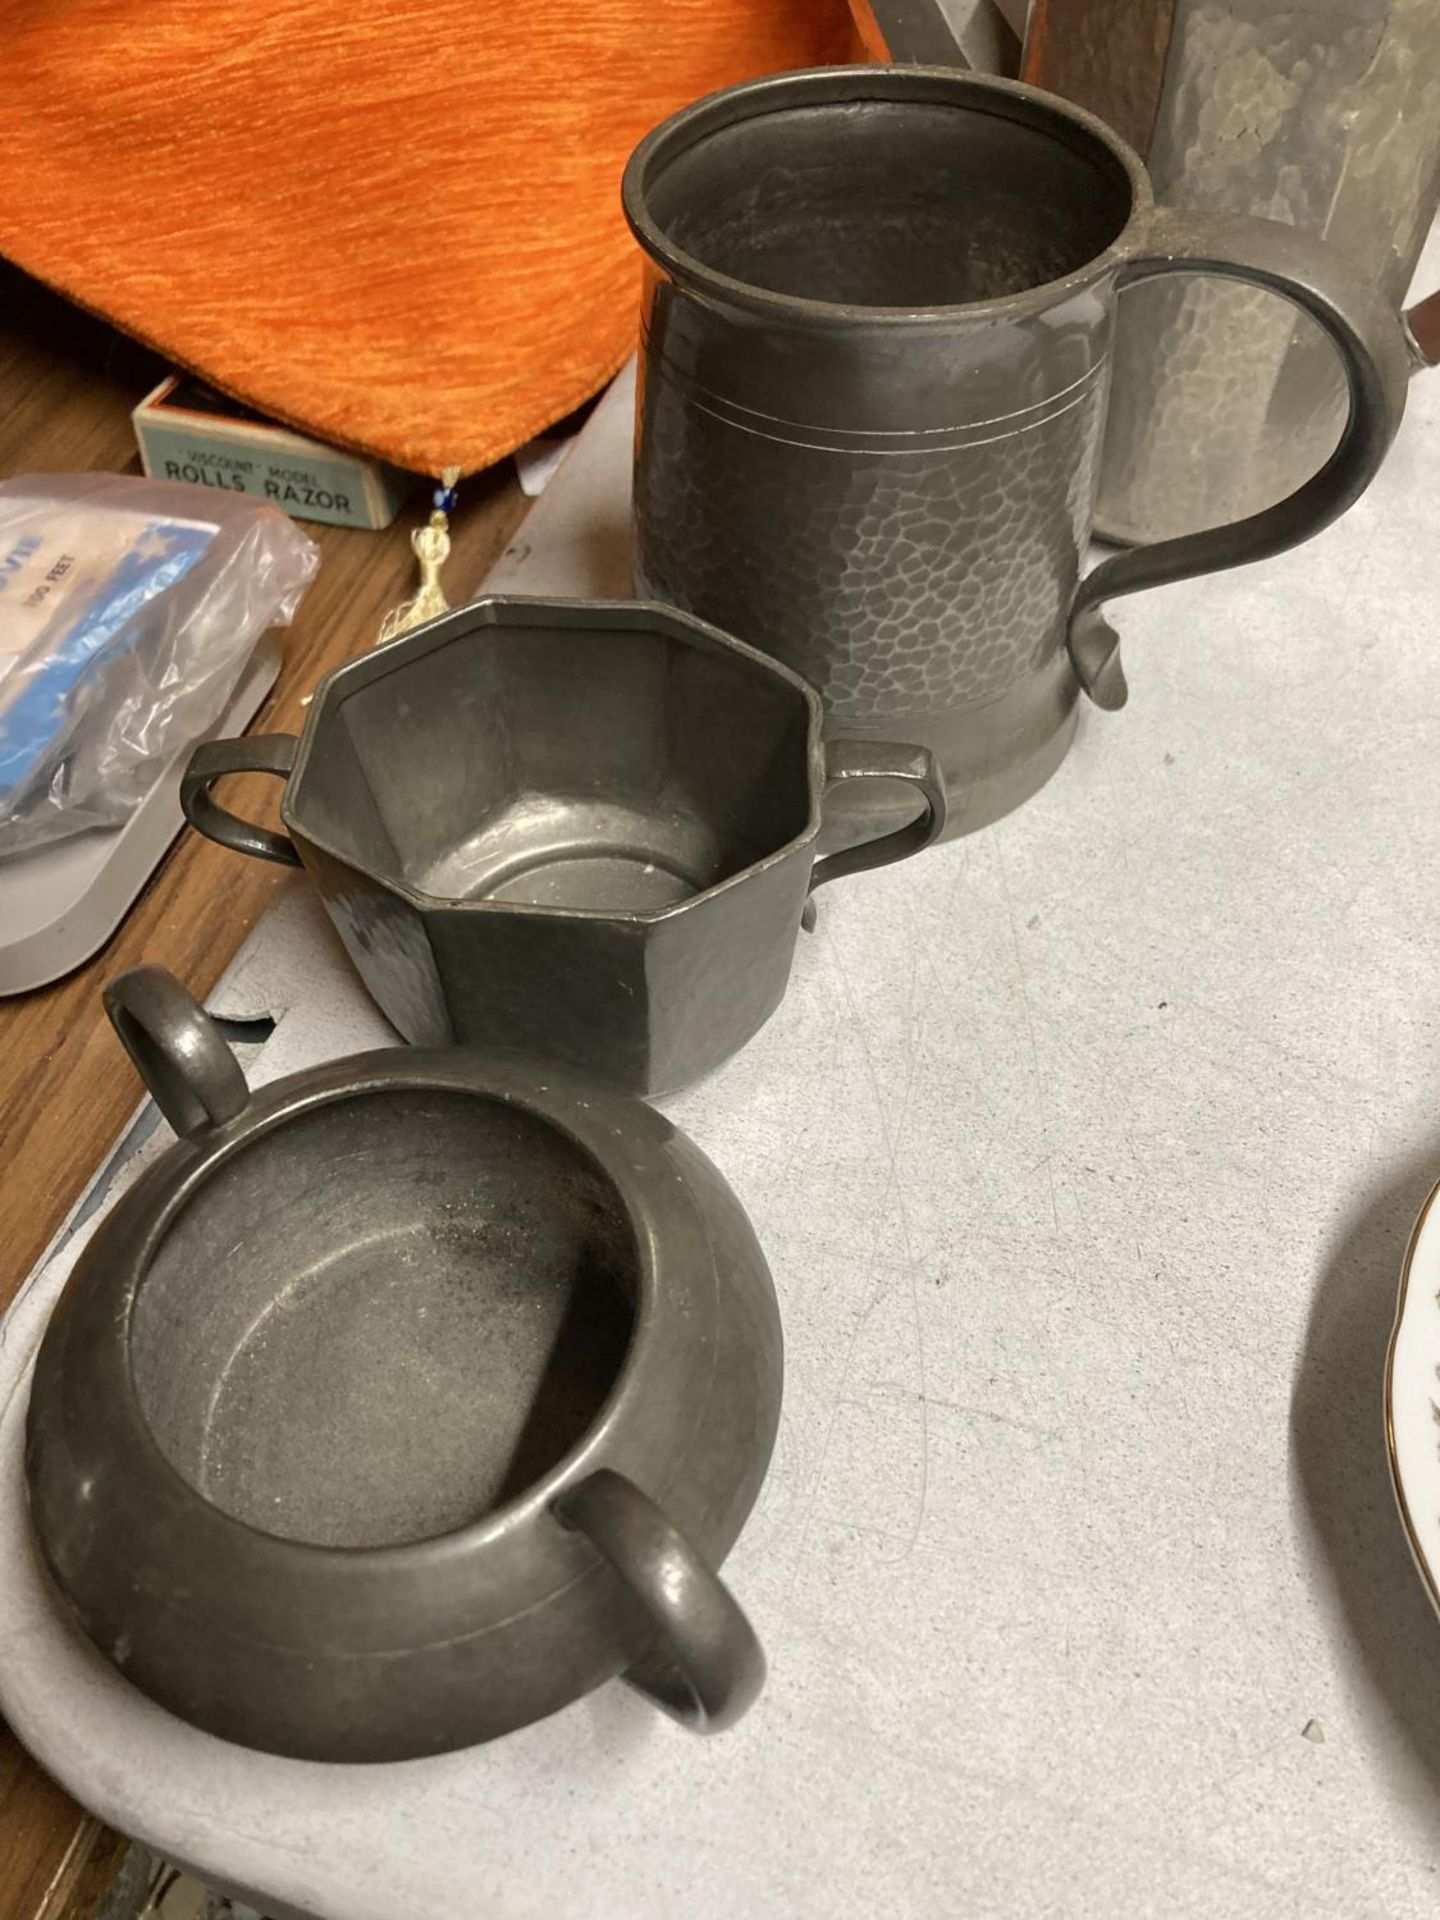 FOUR VINTAGE TUDRIC PEWTER ITEMS - TWO COFFEE POTS AND TWO SUGAR BOWLS, NO. 01650 BY LIBERTY'S OF - Image 3 of 5